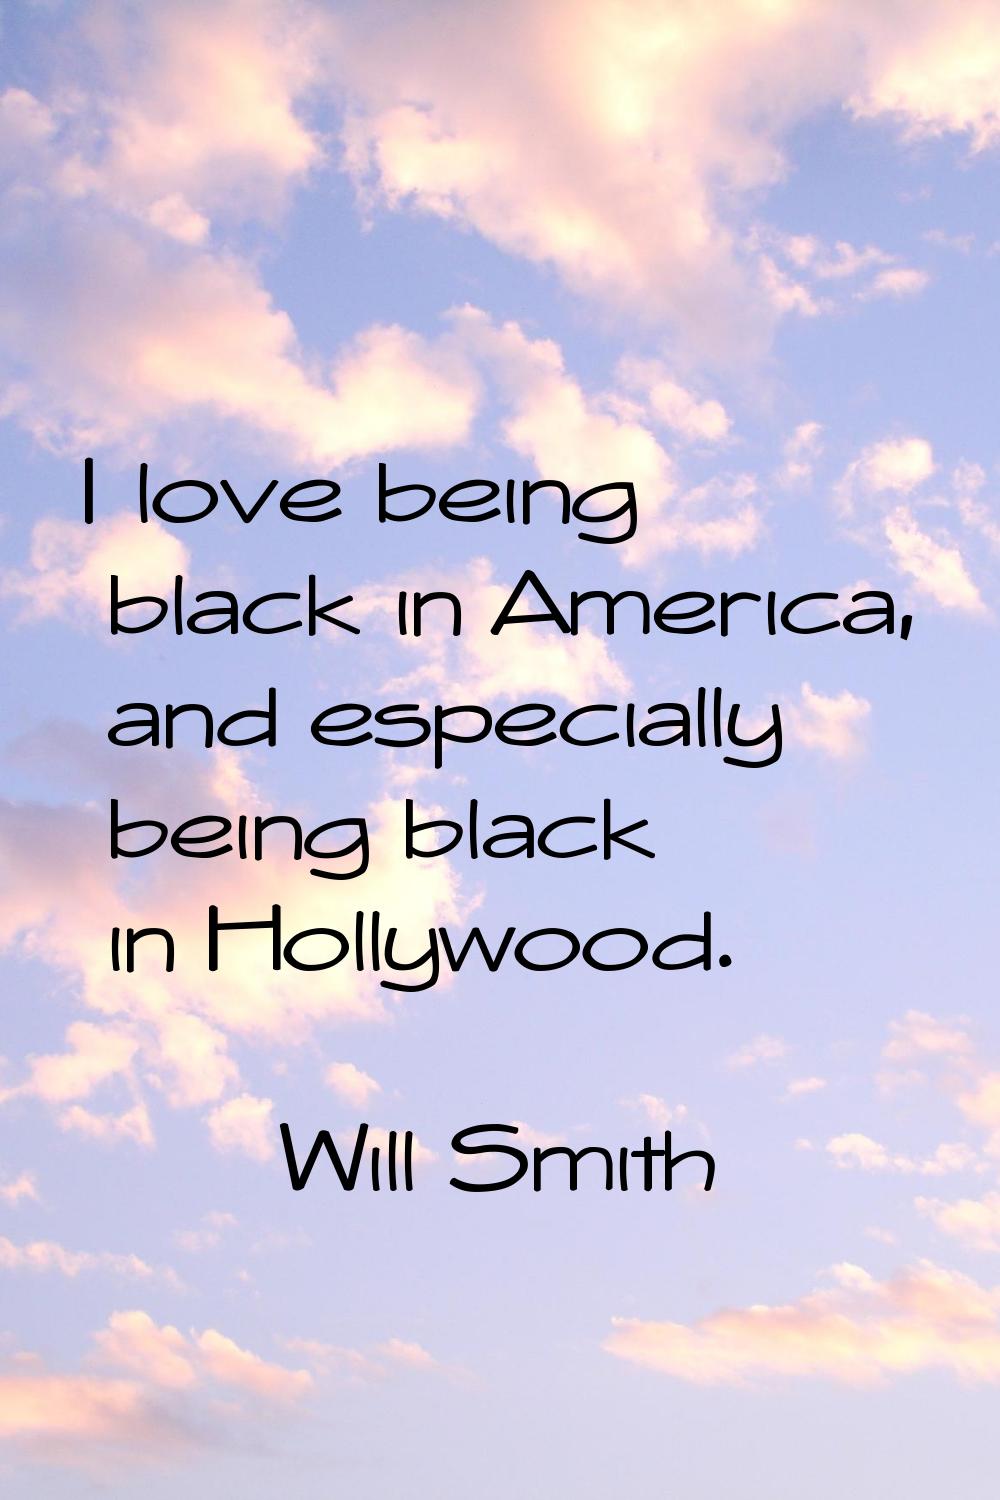 I love being black in America, and especially being black in Hollywood.